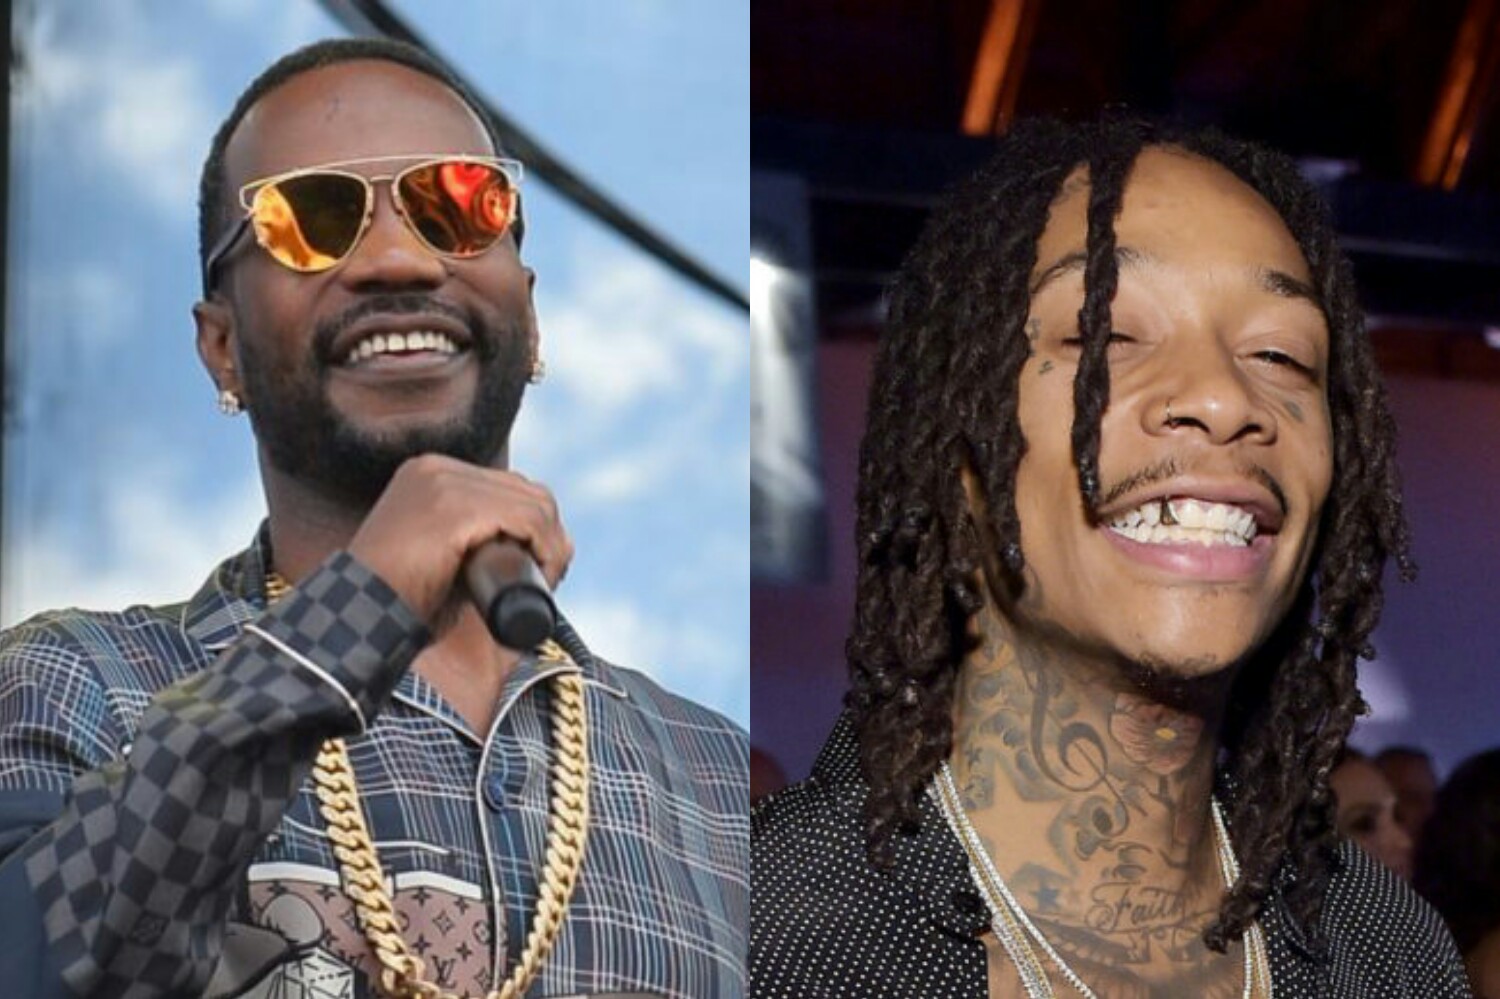 Juicy J Leaves Columbia Record to Work With Wiz Khalifa